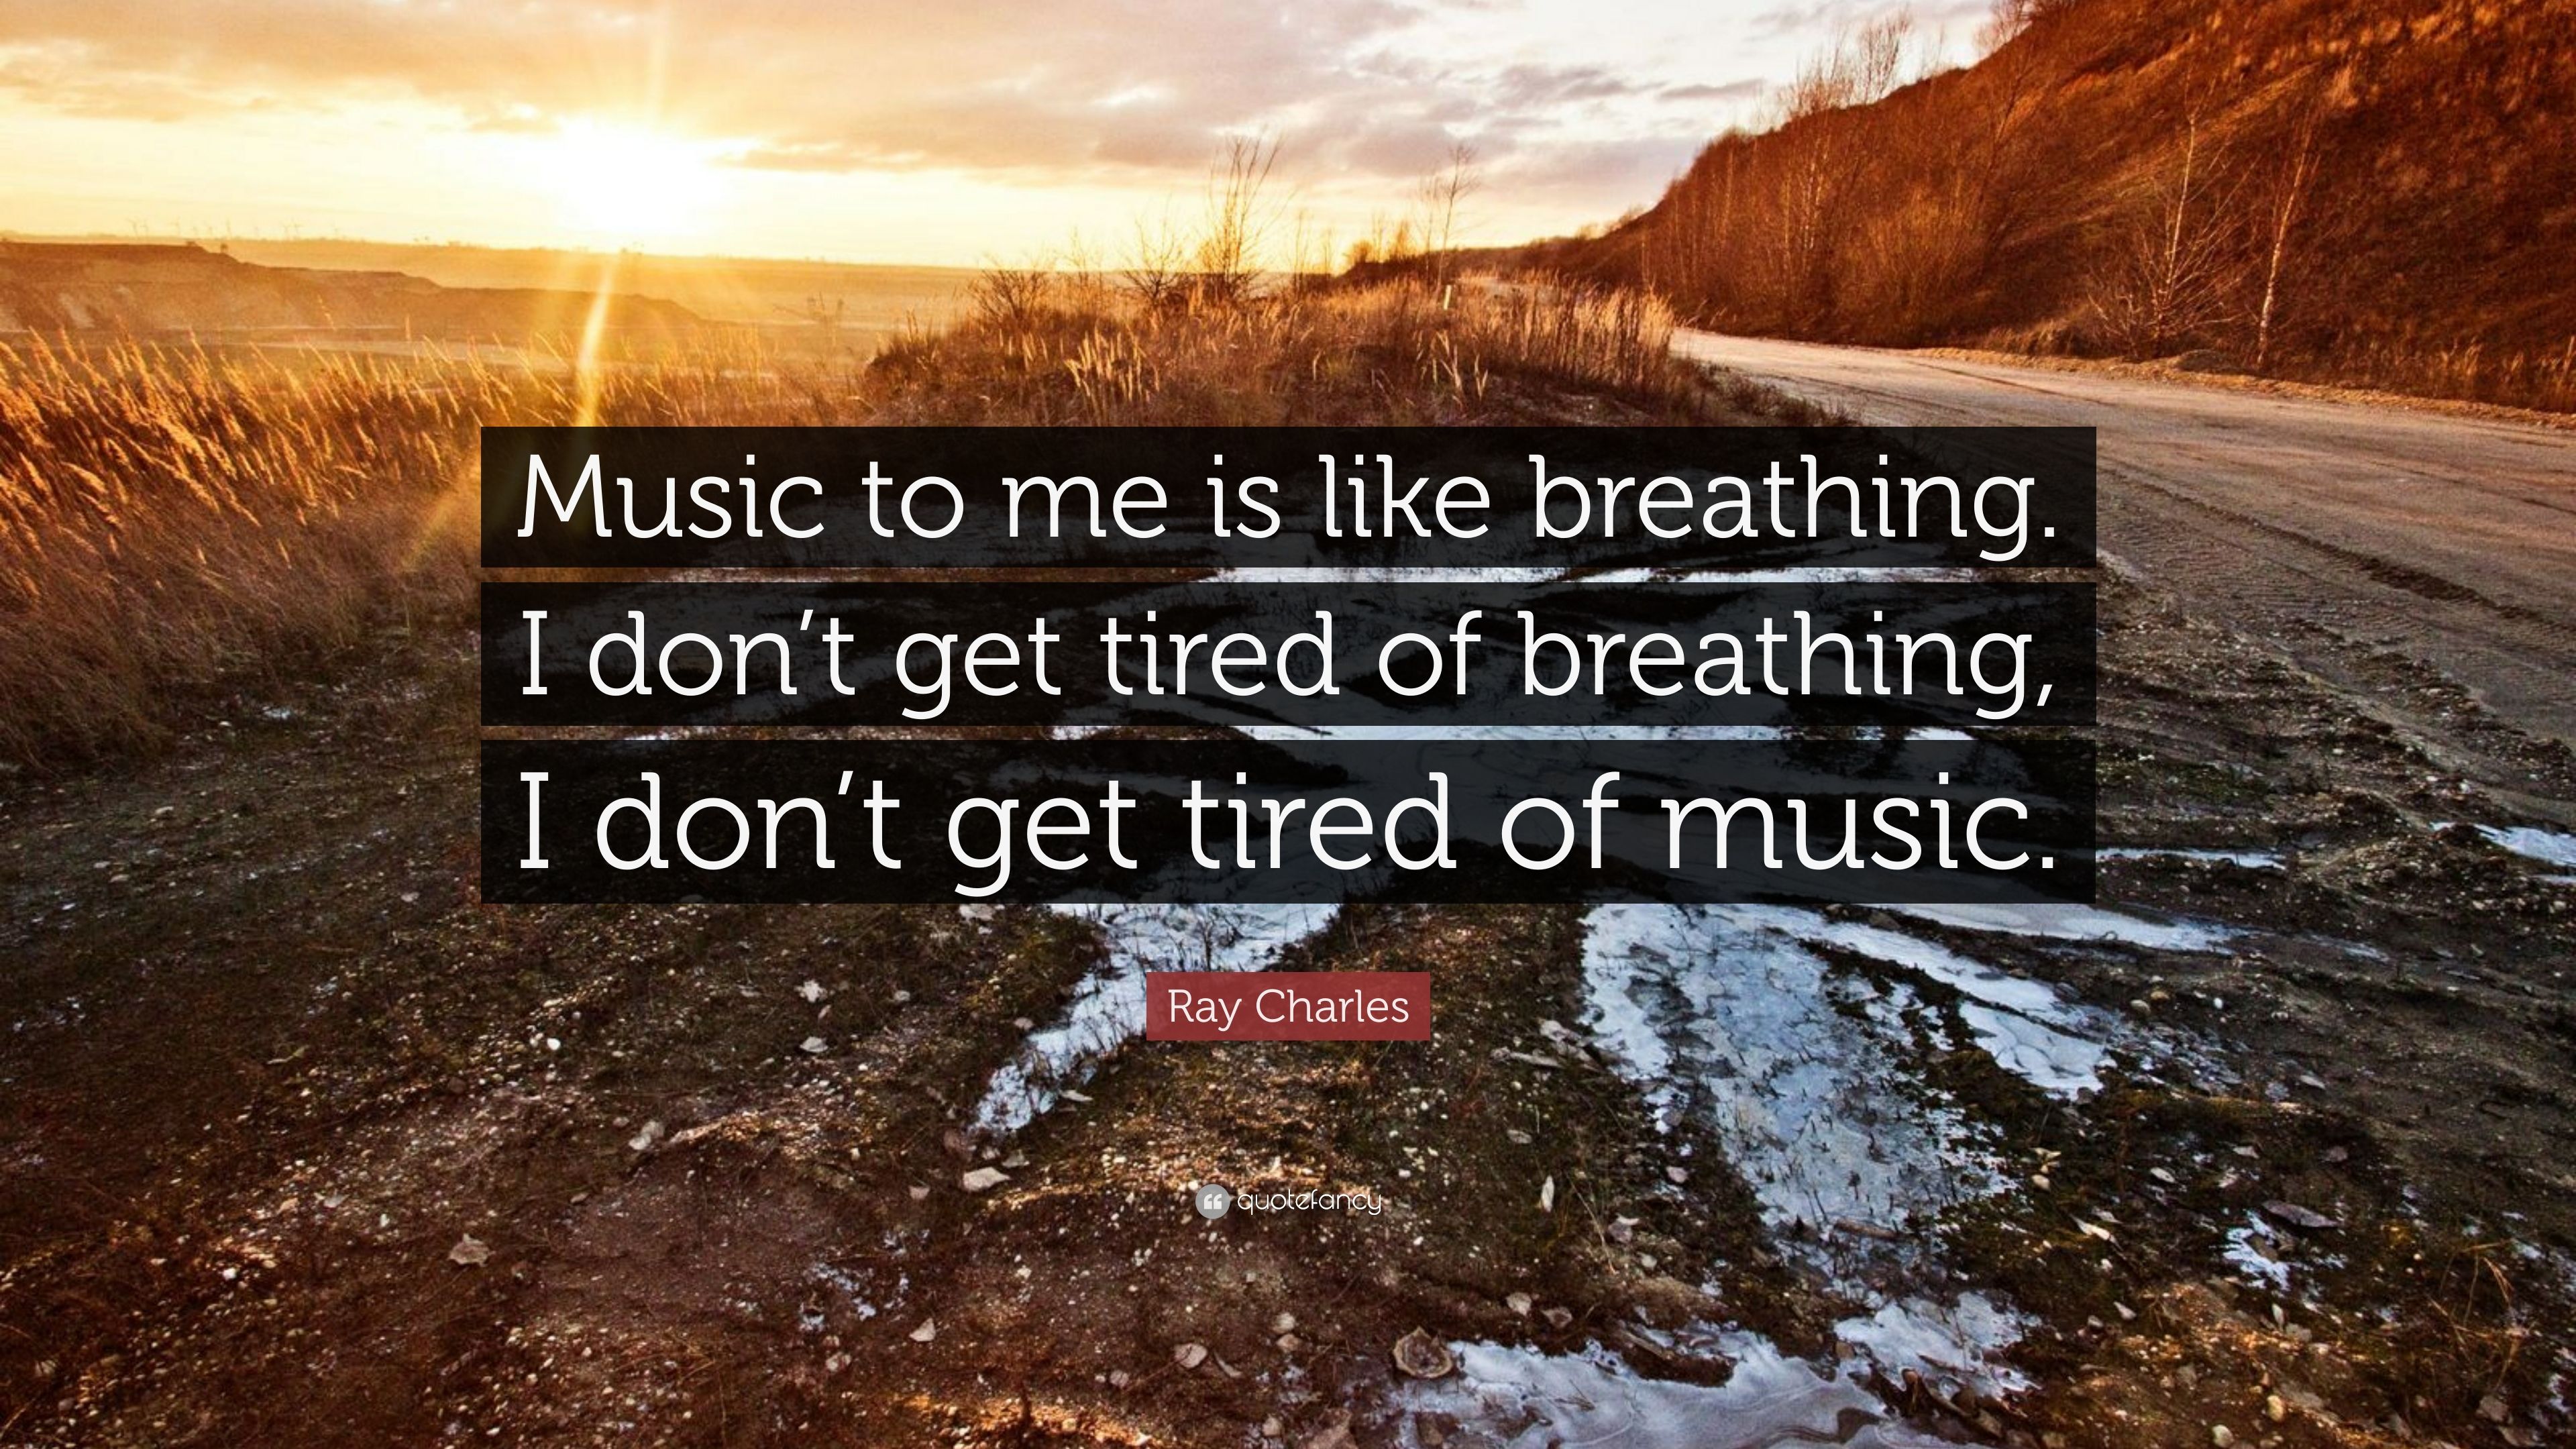 Ray Charles Quote: “Music to me is like breathing. I don't get tired